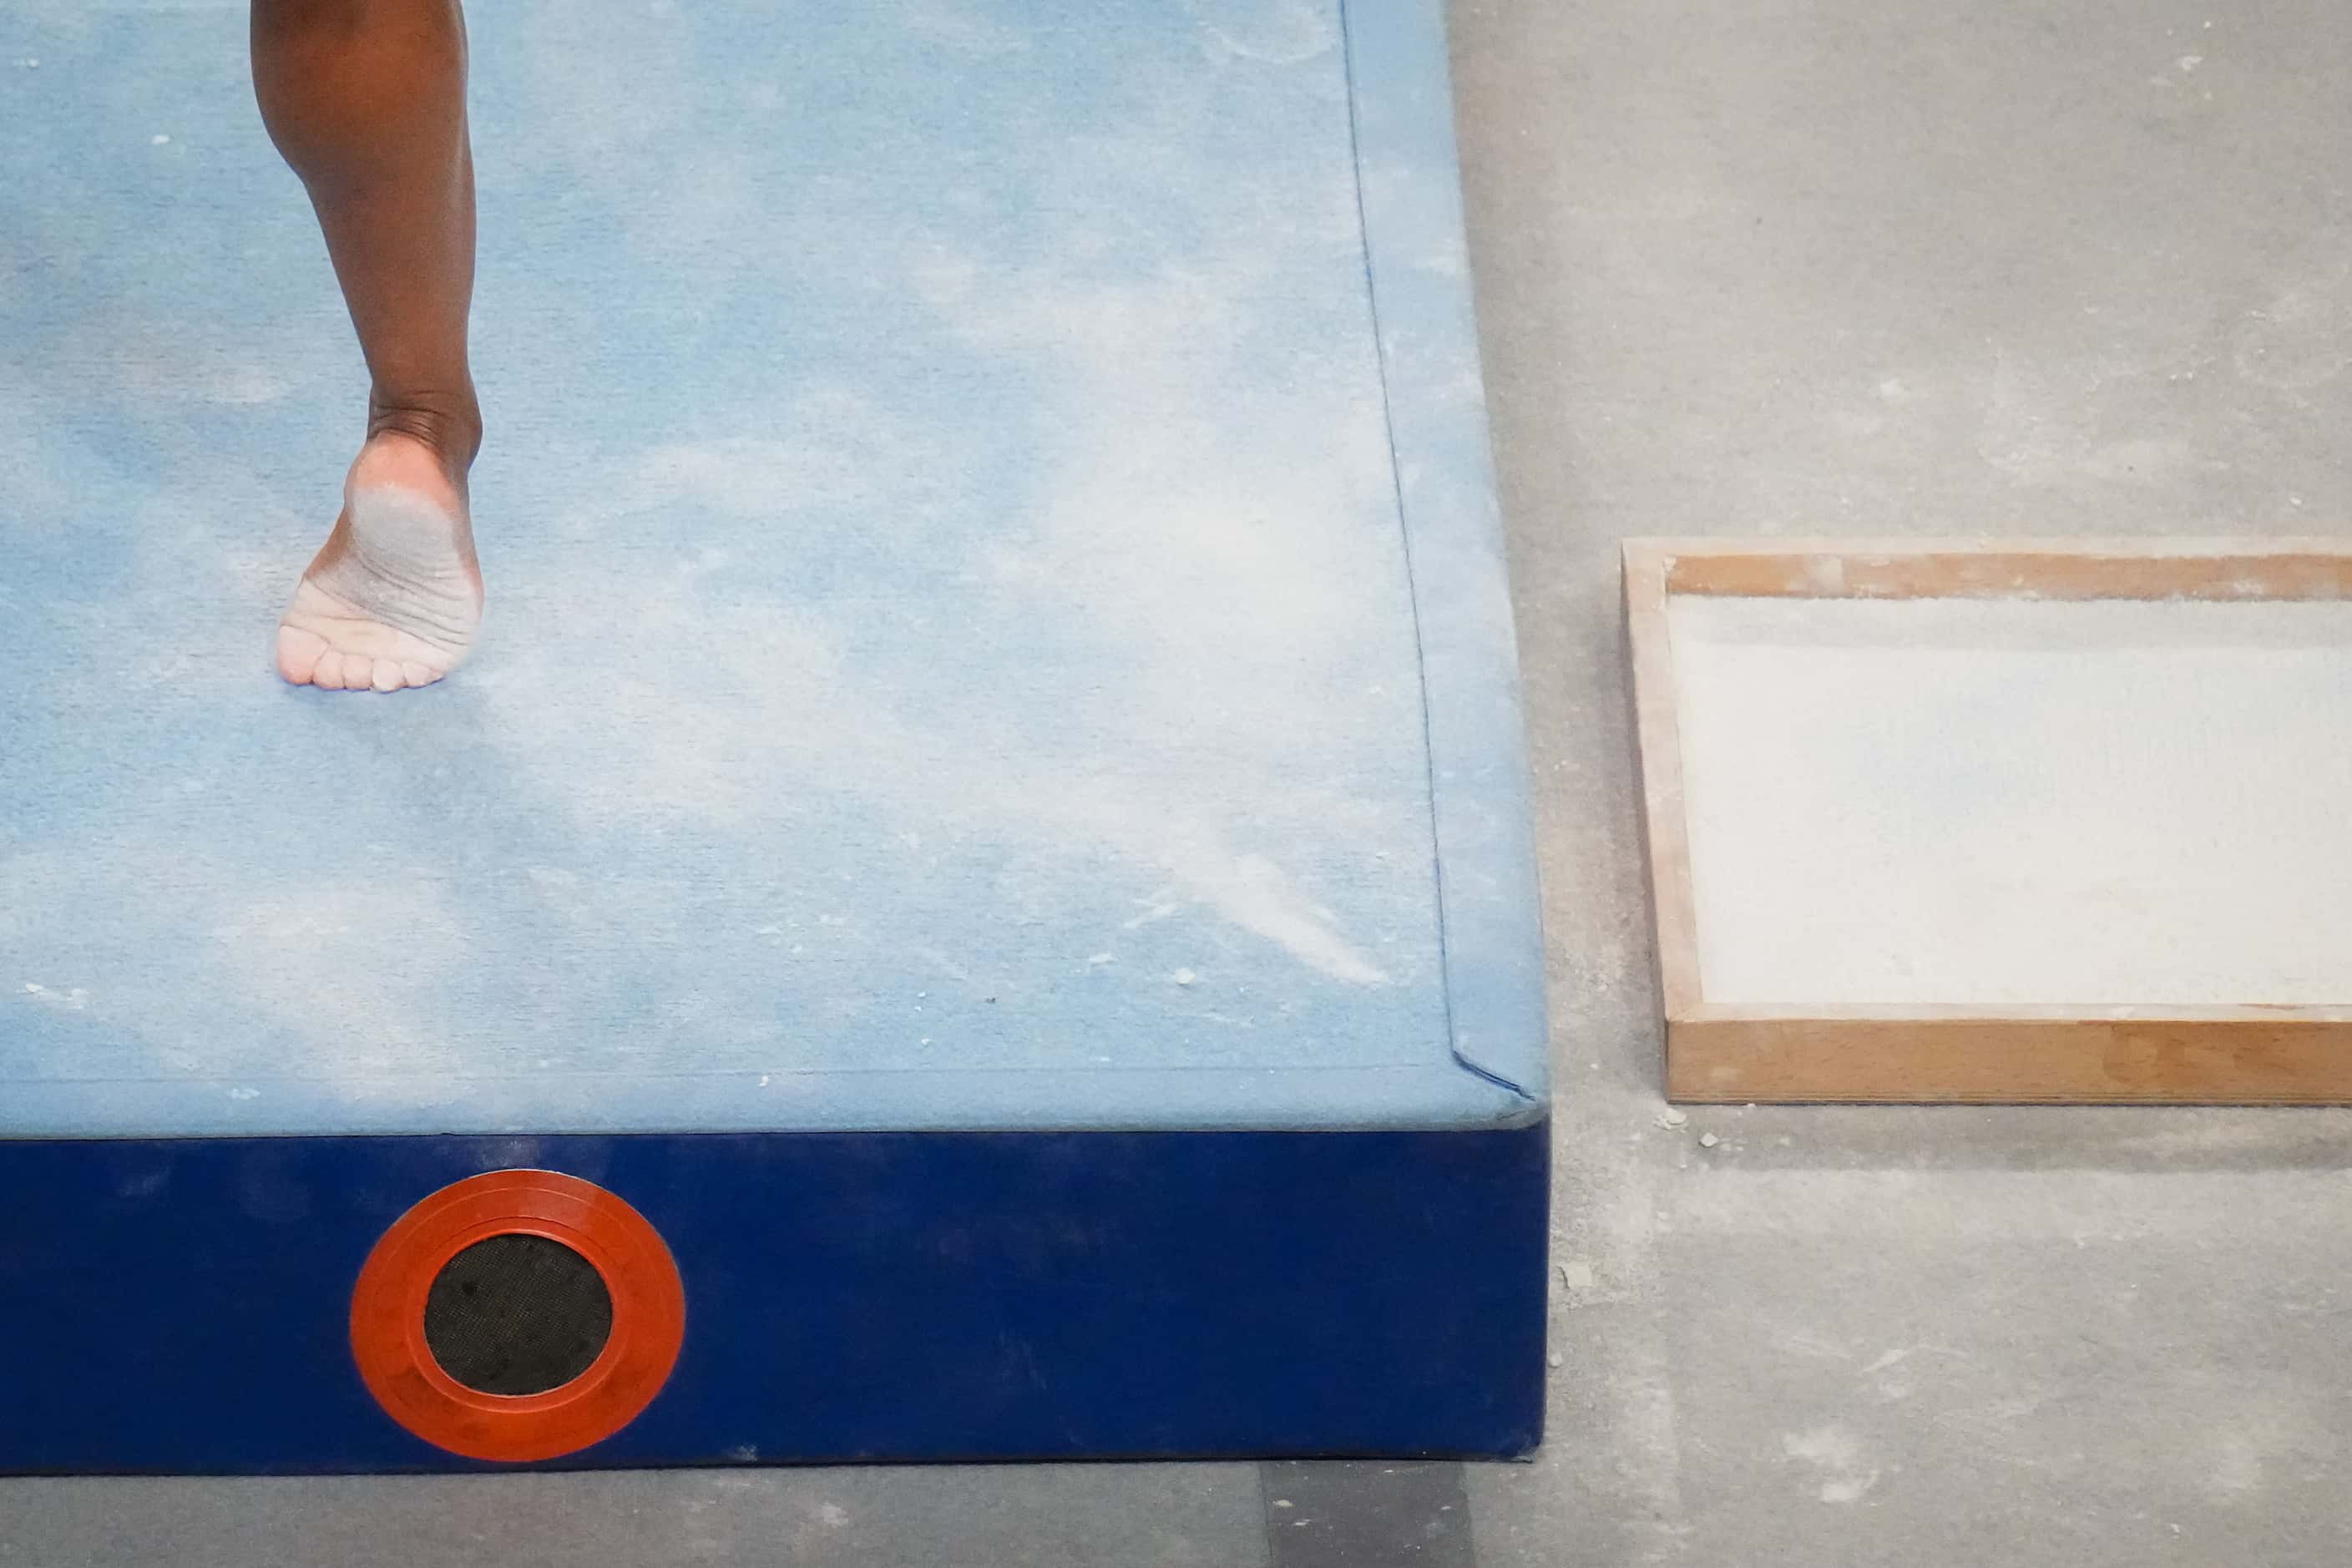 Simone Biles steps out of chalk box as she prepares to compete on the balance beam during...